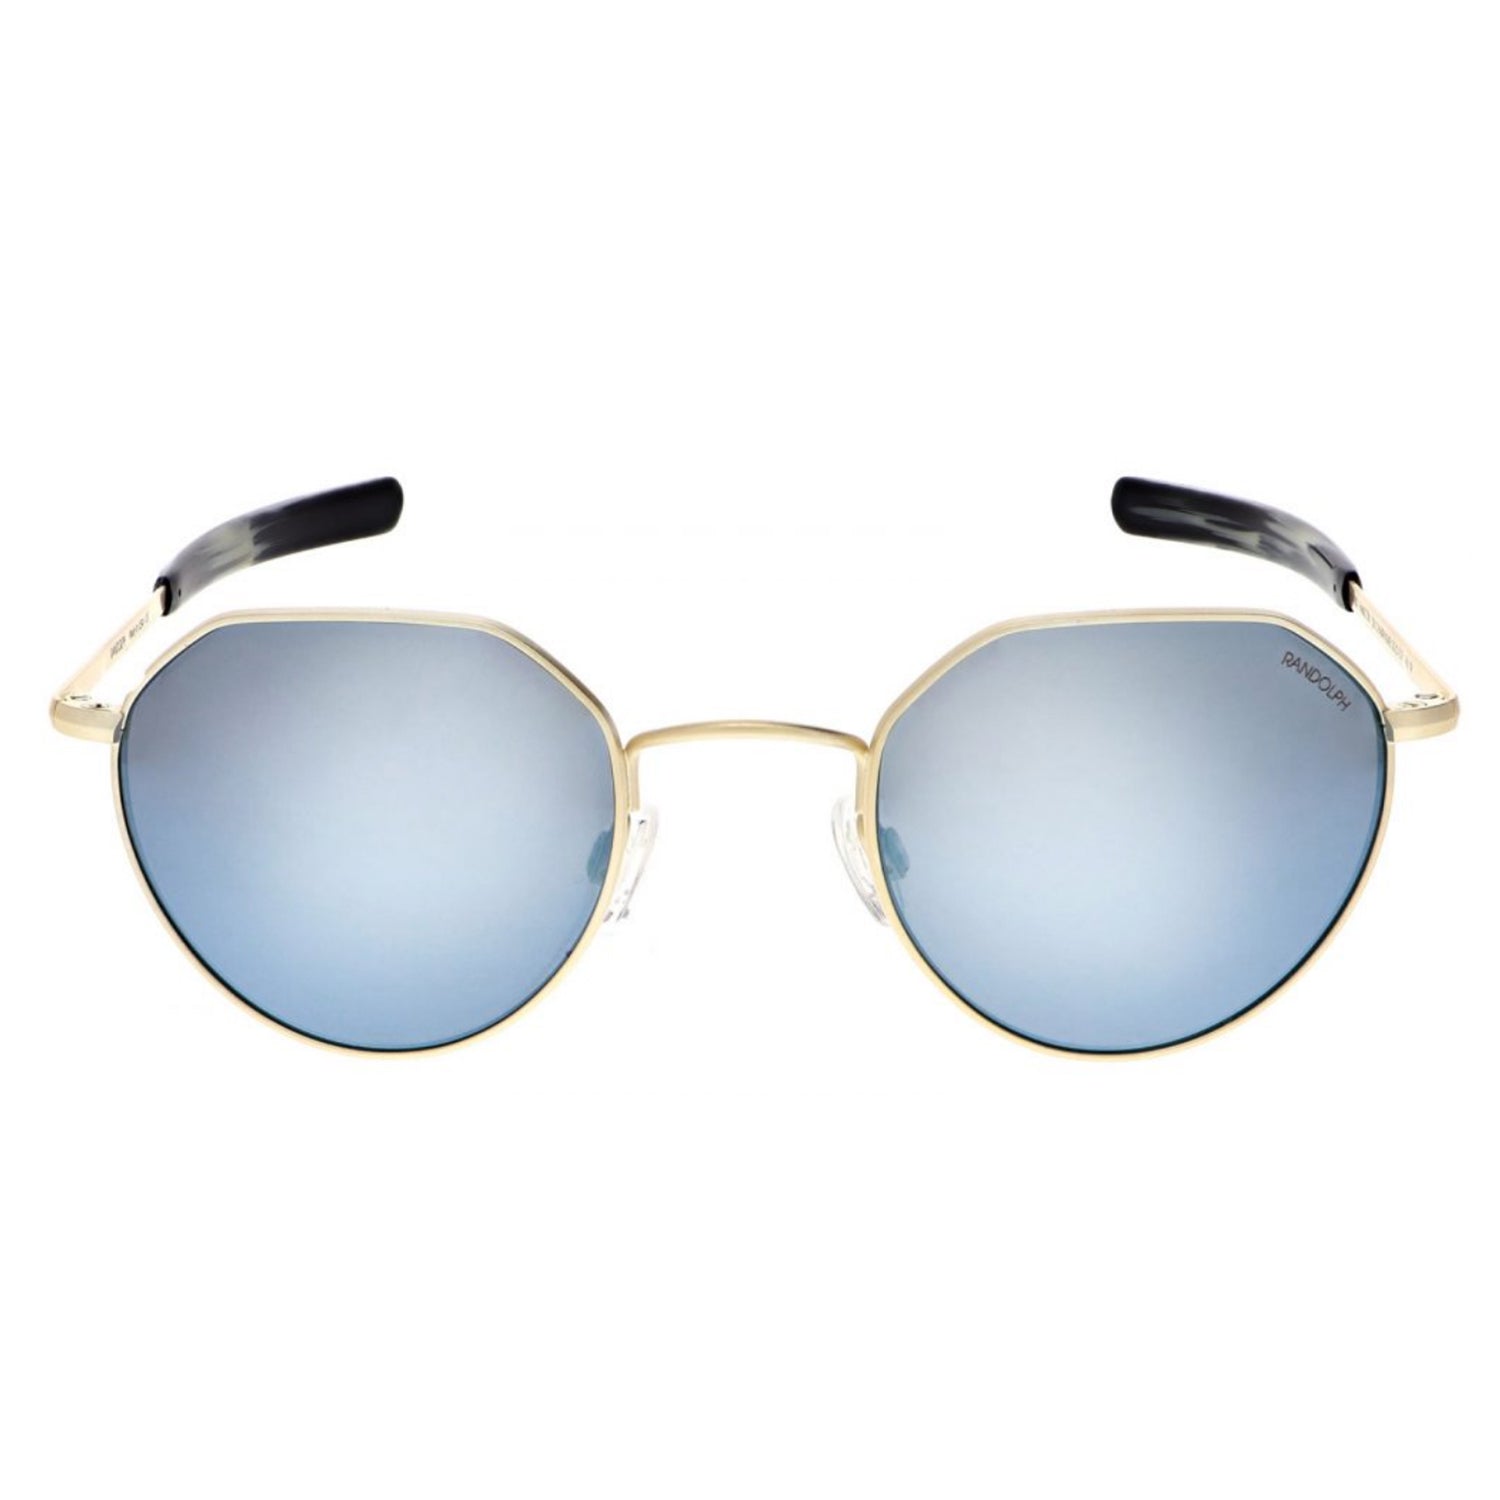 Hamilton Sunglasses, 22k Champagne Gold Frames with Mystic Blue Lenses by Randolph - Talisman Collection Fine Jewelers